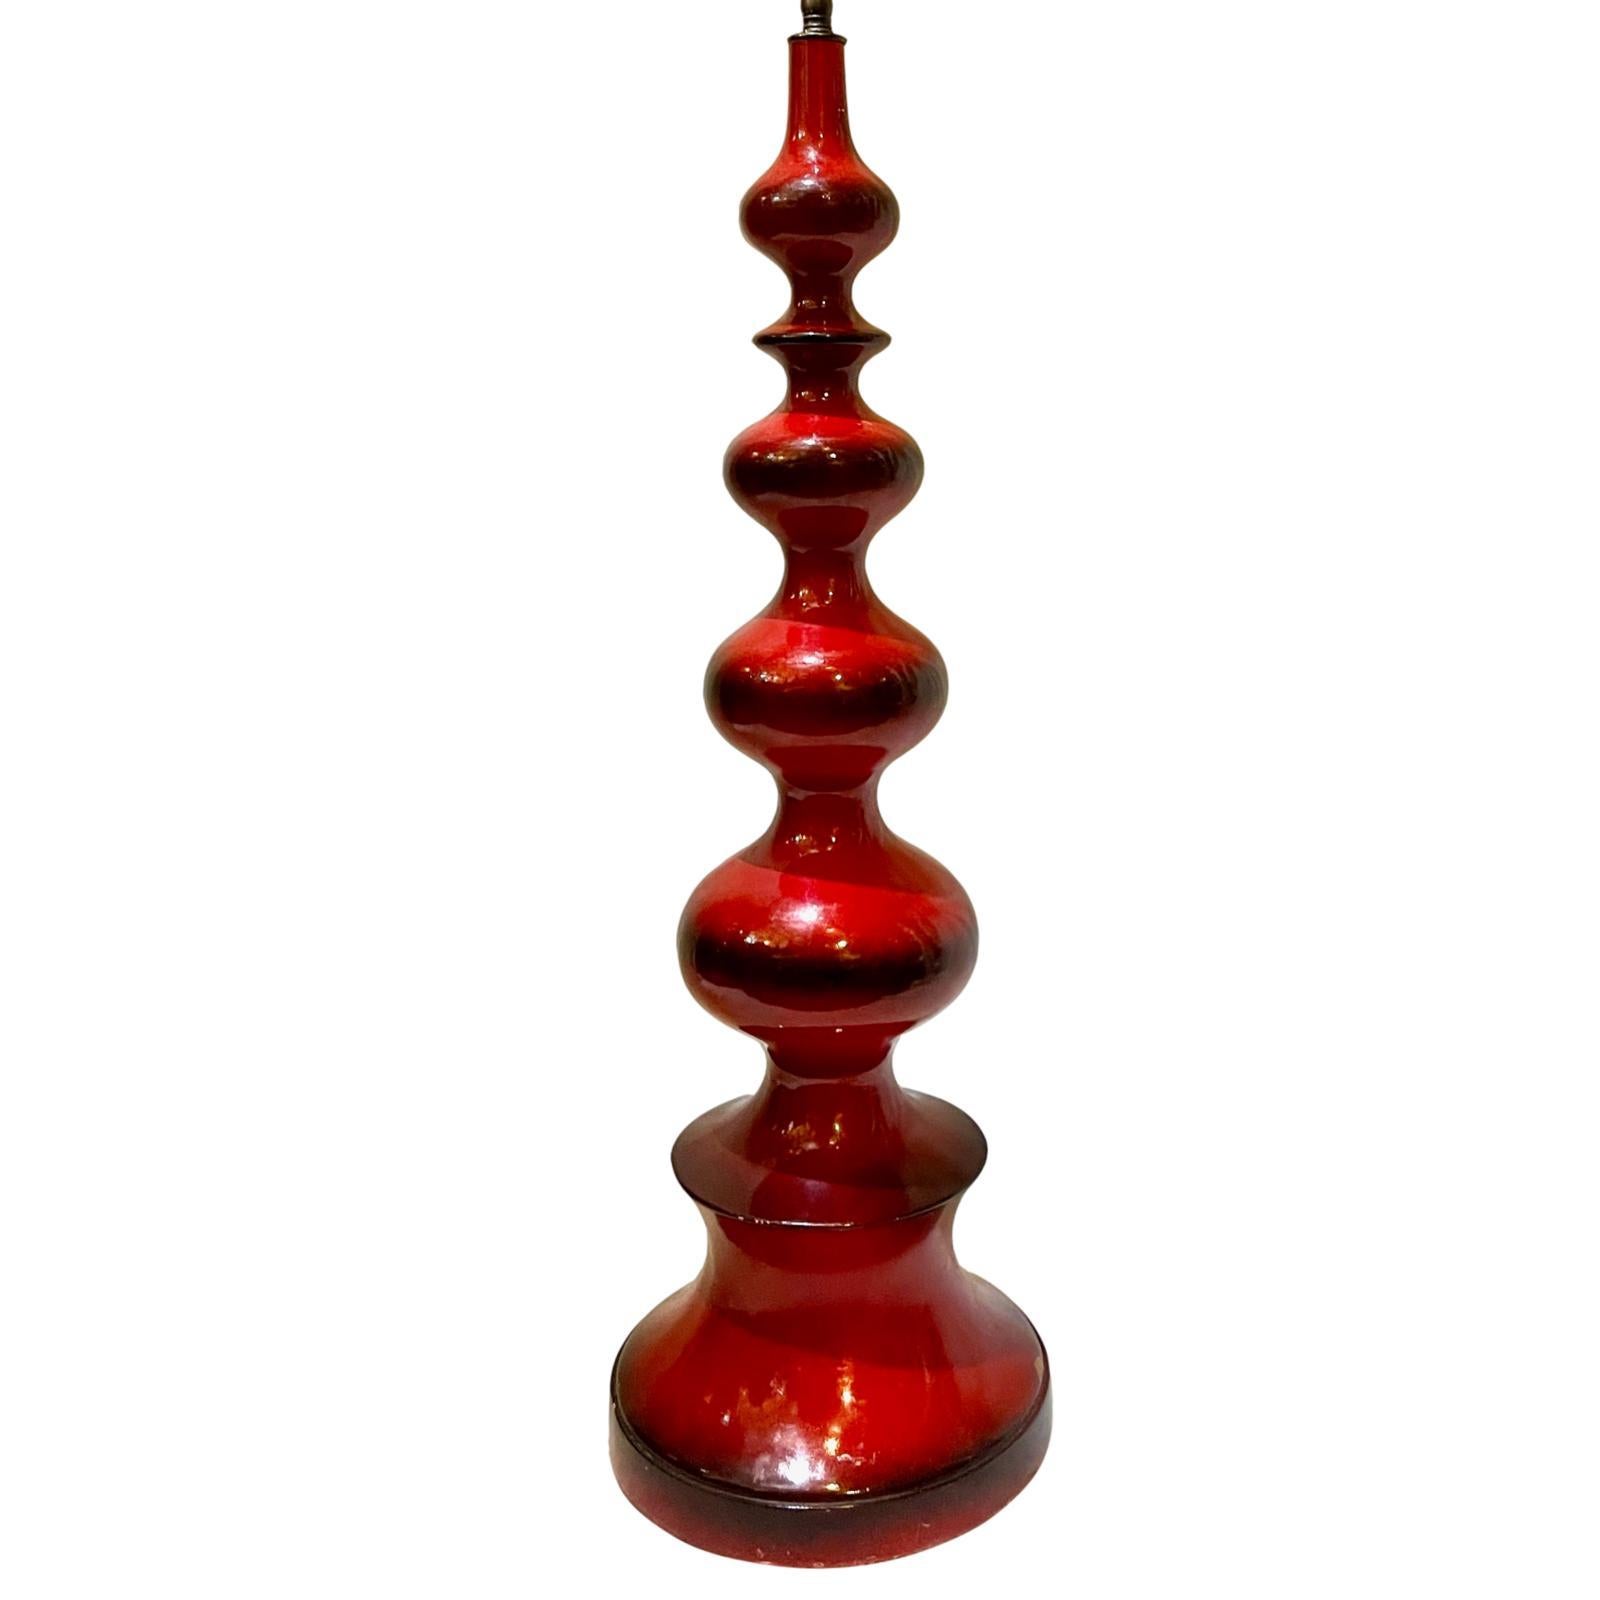 A single circa 1950's Italian red lacquered wood table lamp.

Measurements:
Height: 27”
Height to shade rest: 36.5